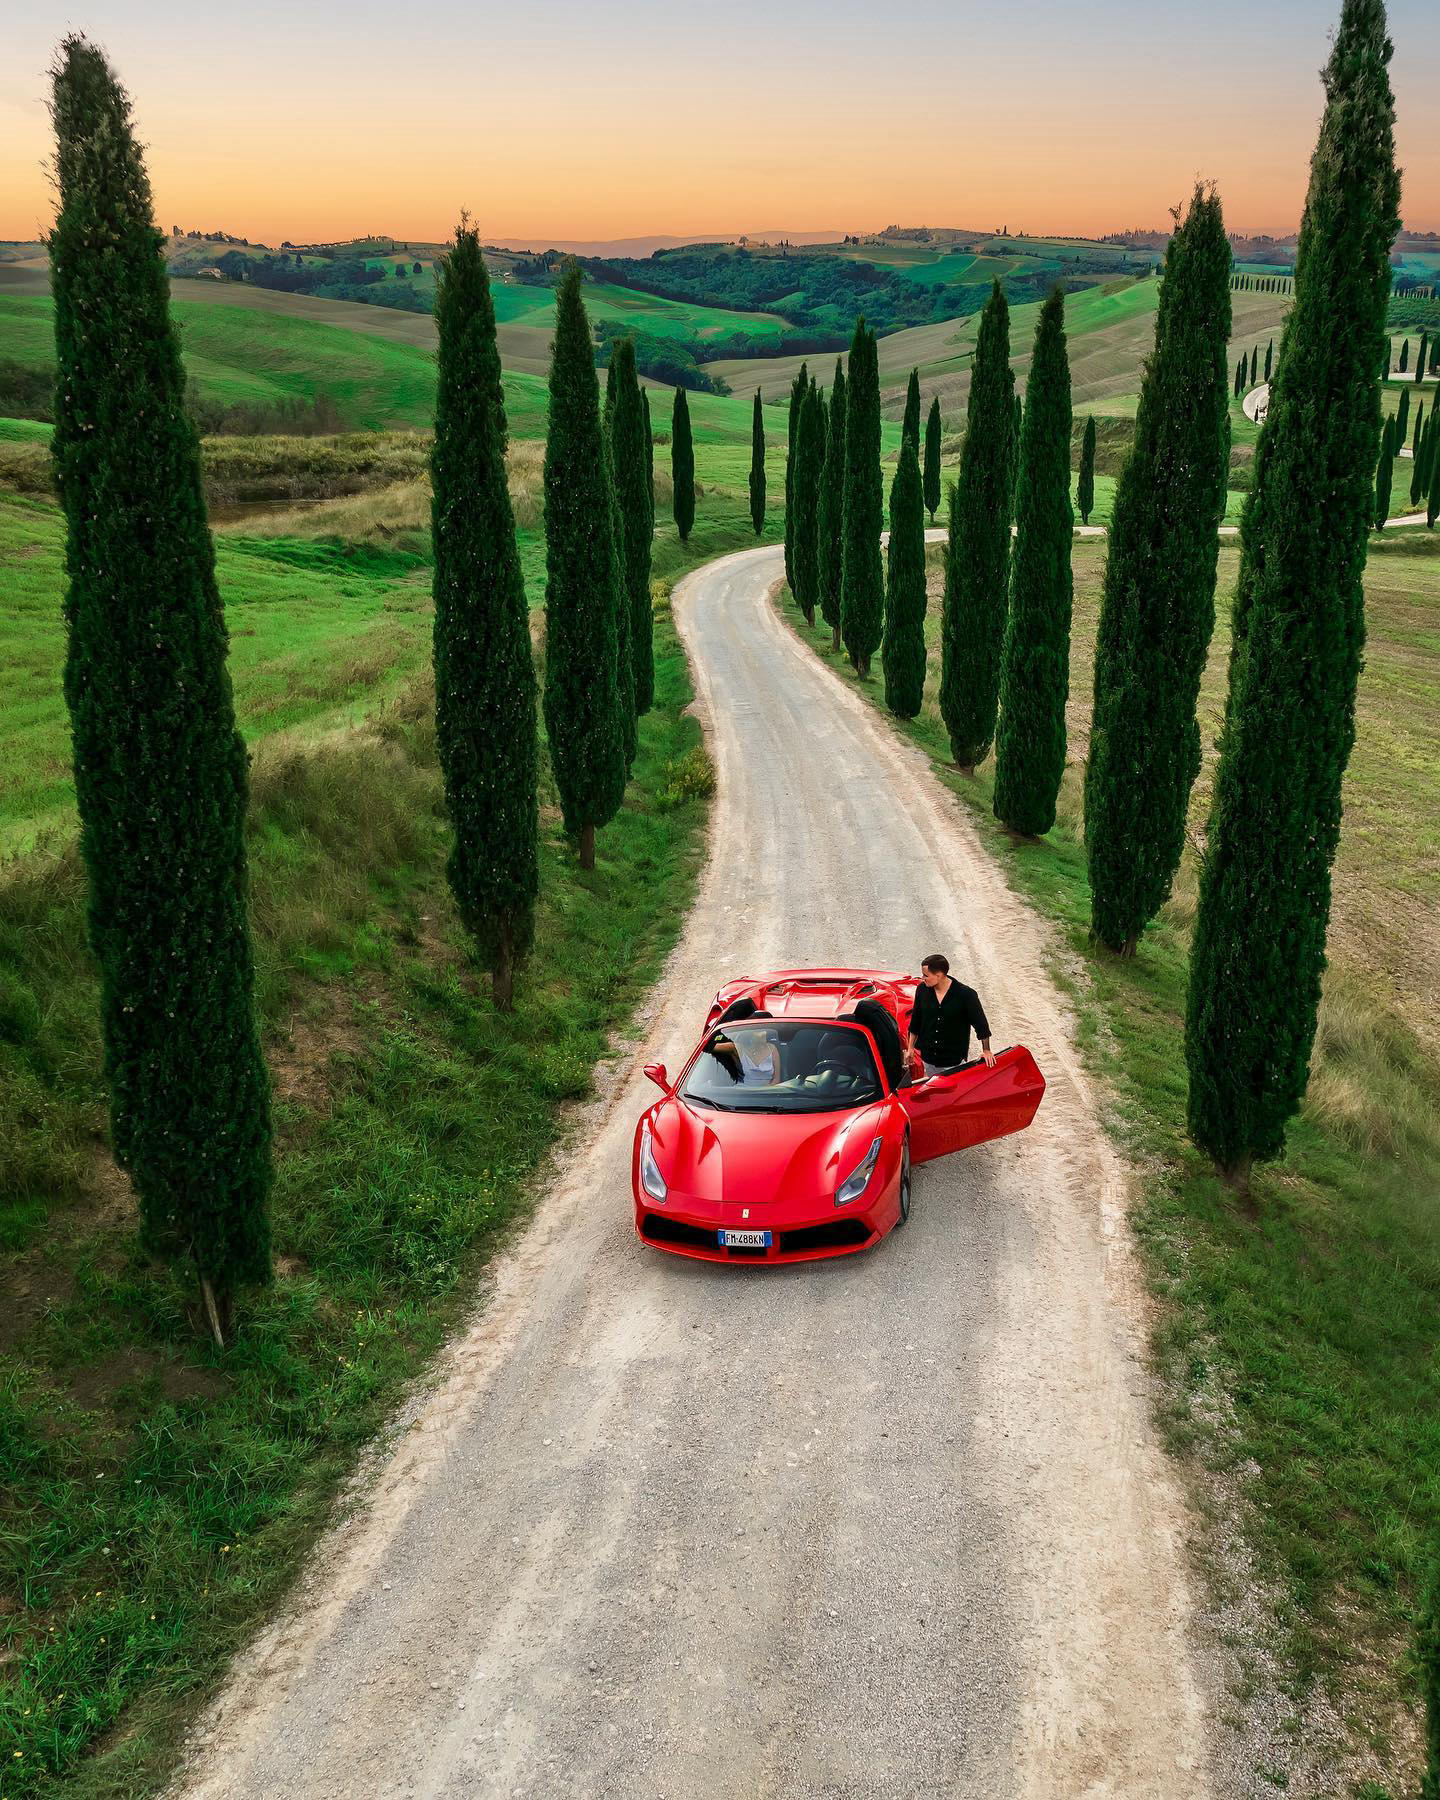 JEREMY AUSTIN - Exploring the magic of Tuscany with a curated itinerary and this stunning red Ferrar